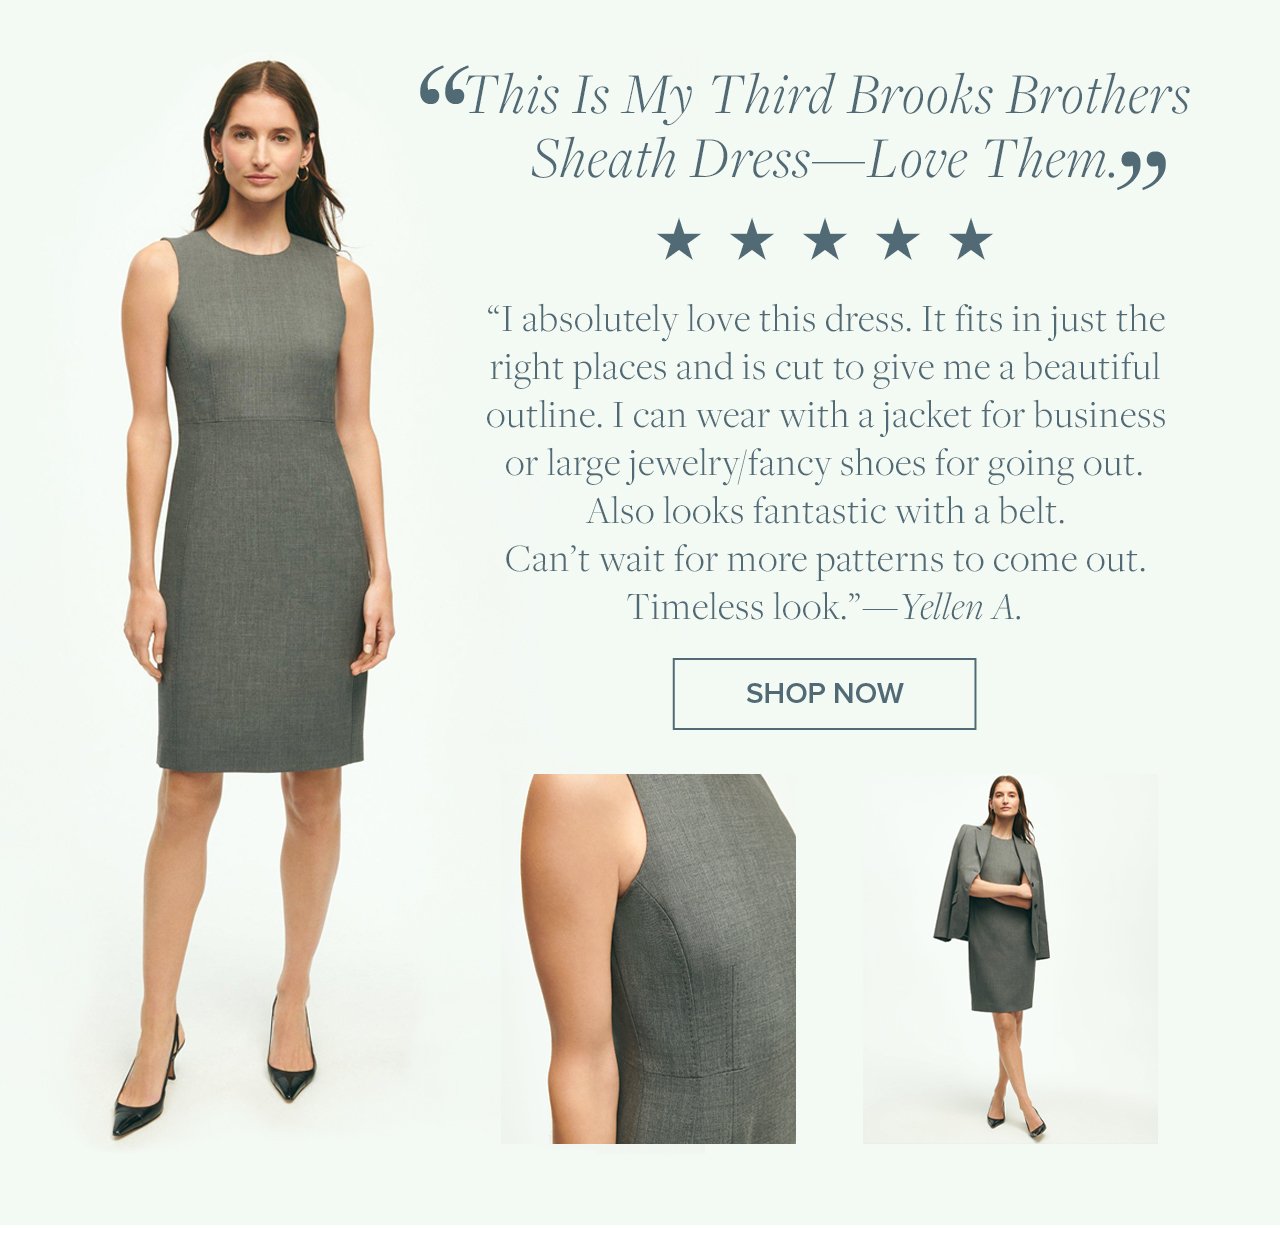 This is My Third Brooks Brothers Sheath Dress - Love Them. Shop Now